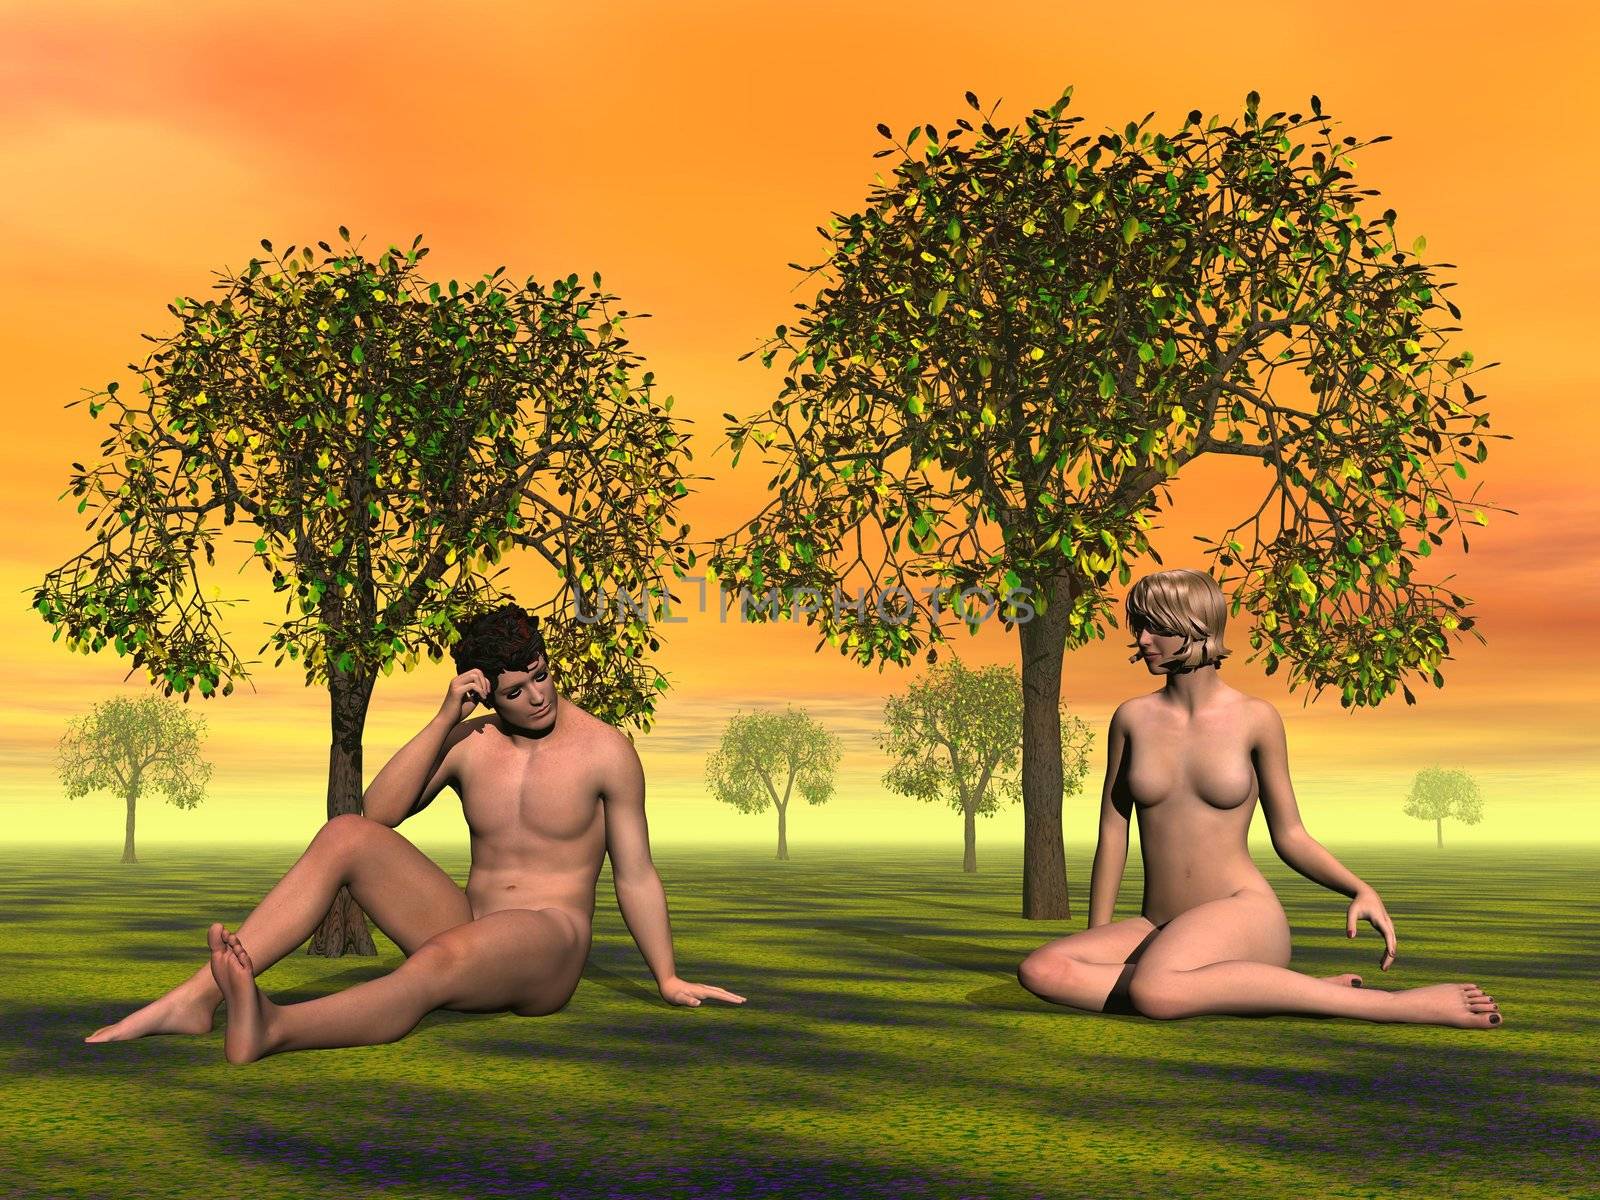 Naked Adam and Eve sitting on the grass in Eden garden by orange sunset